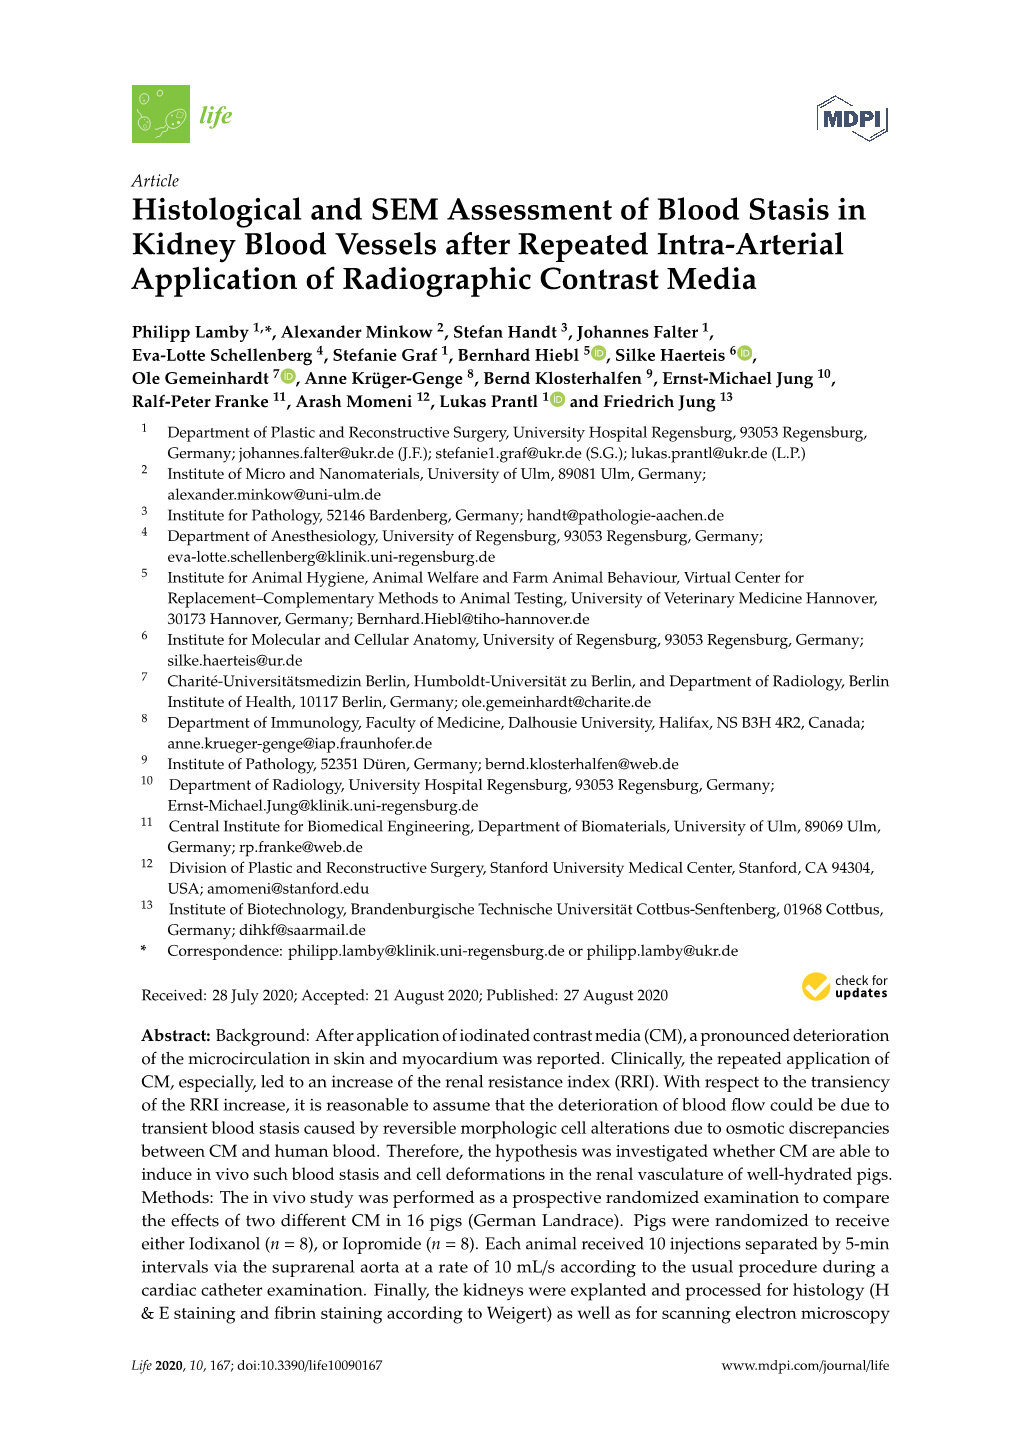 Histological and SEM Assessment of Blood Stasis in Kidney Blood Vessels After Repeated Intra-Arterial Application of Radiographic Contrast Media